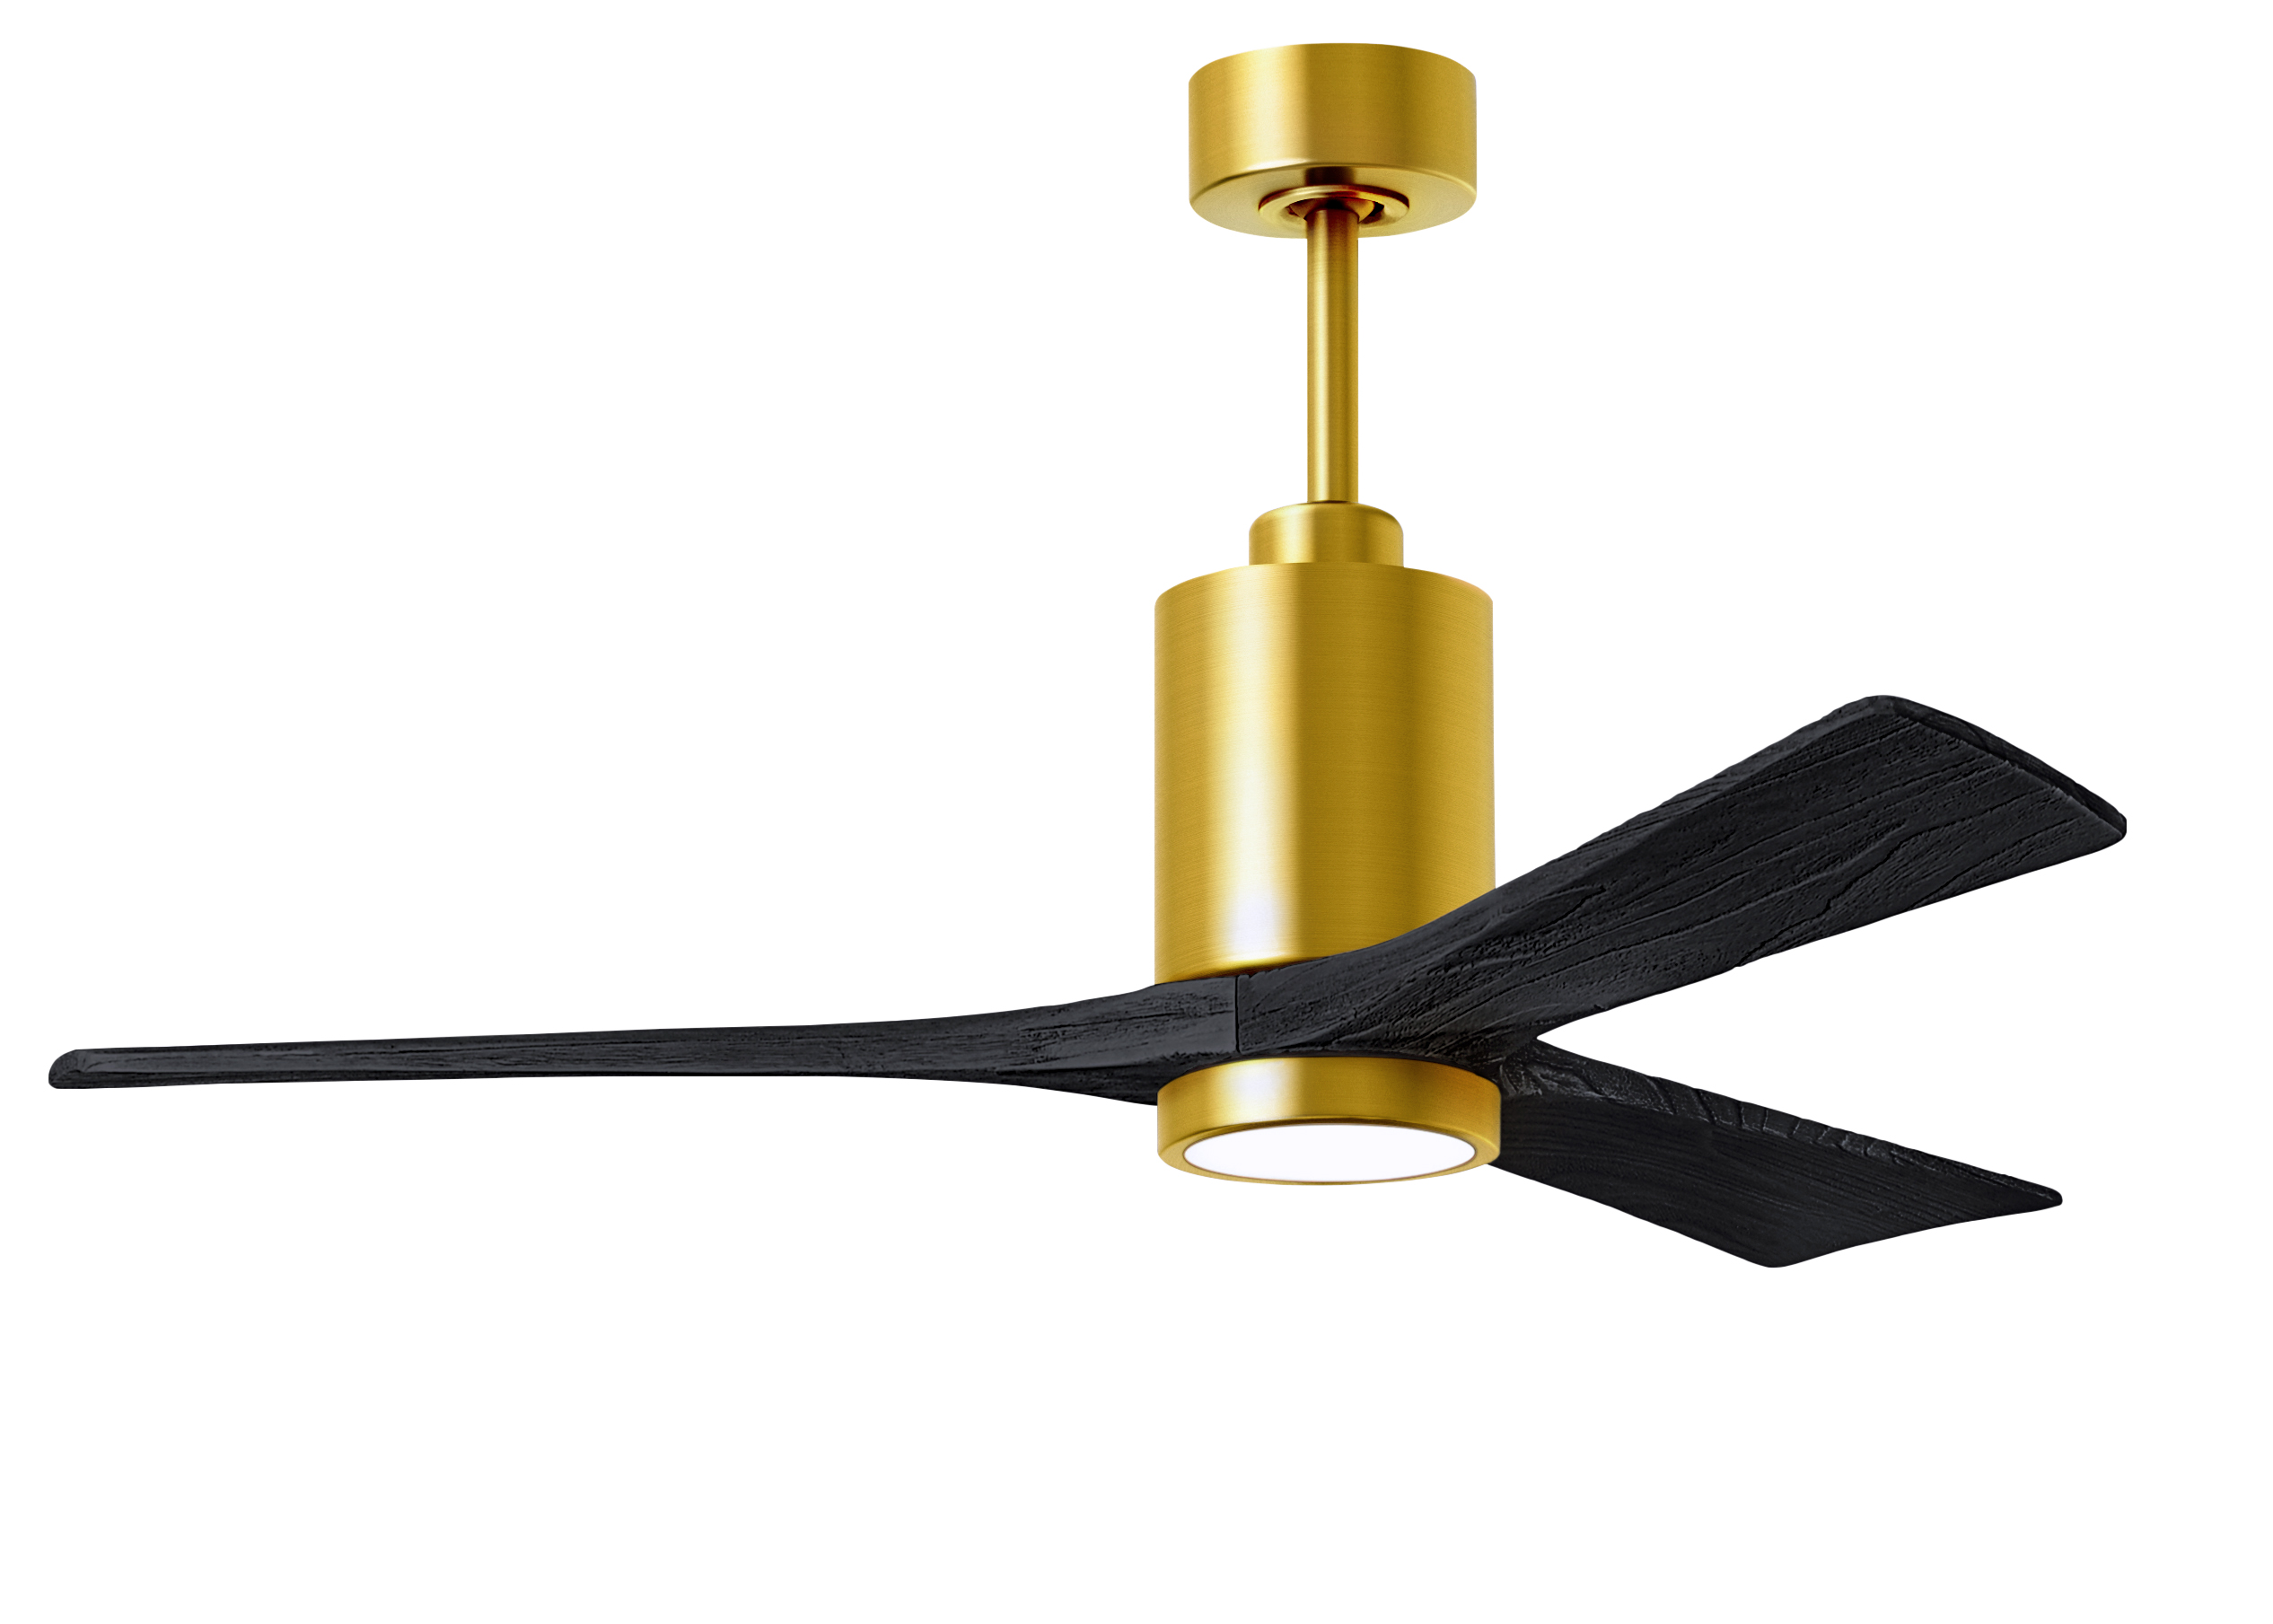 Patrícia–3 Ceiling Fan in Brushed Brass with 52